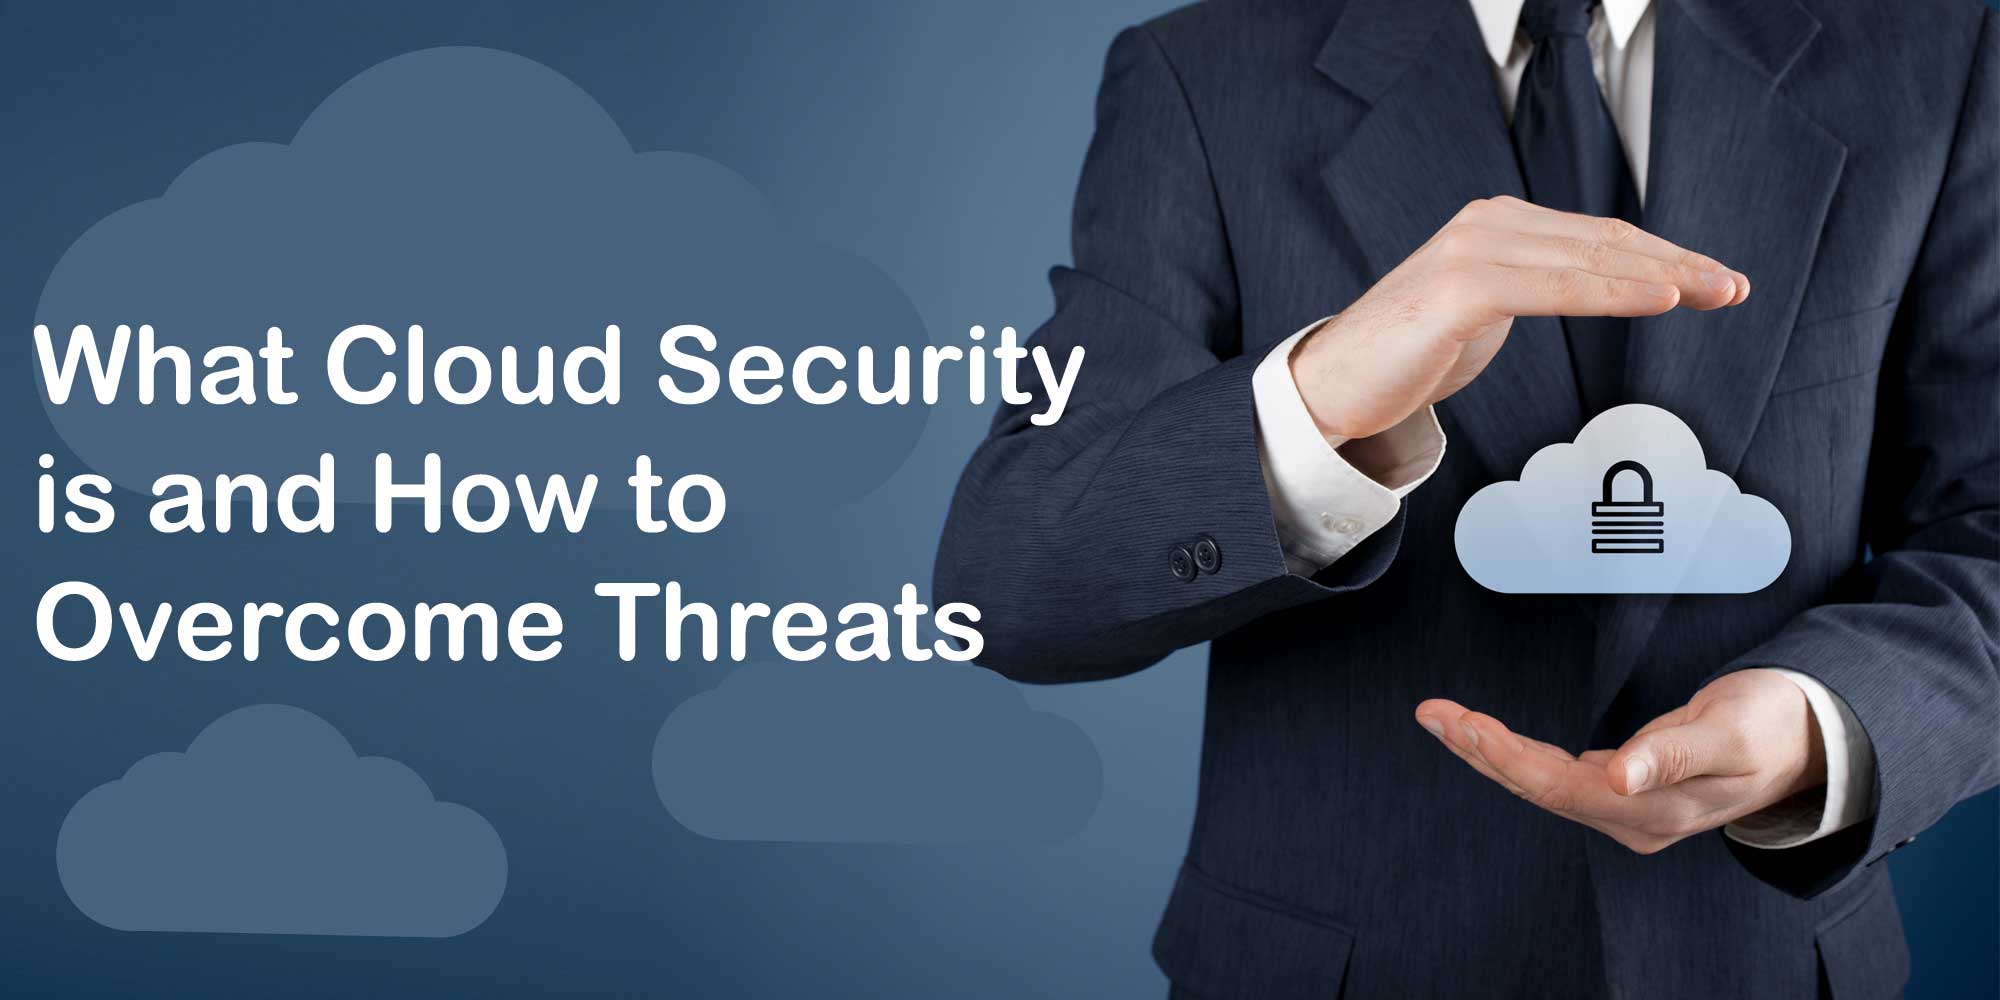 what cloud security is and how to overcome threats